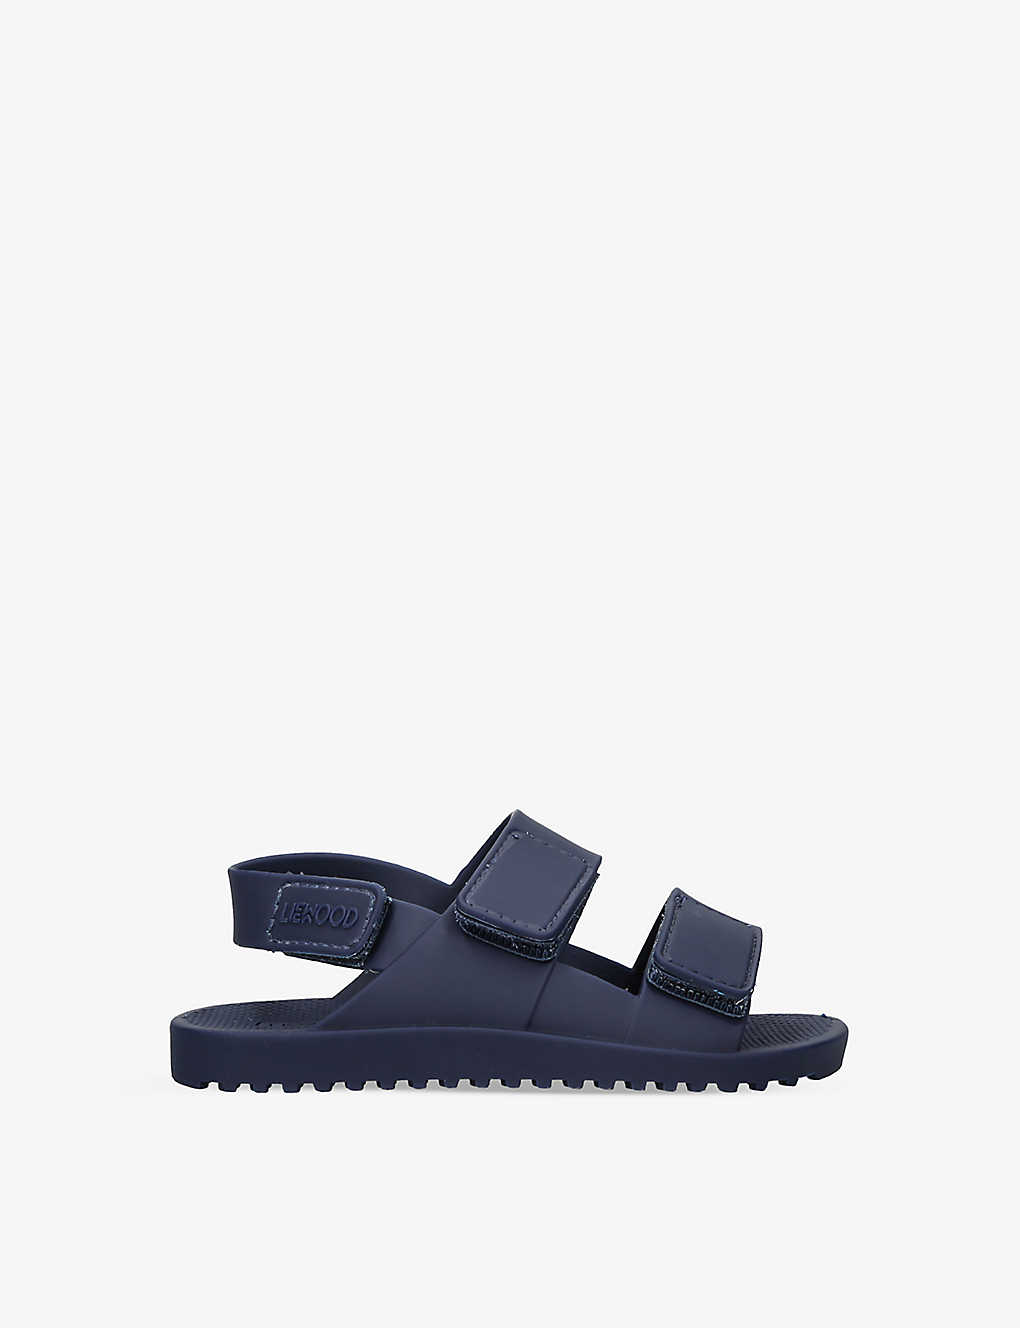 LIEWOOD LIEWOOD BOYS NAVY KIDS JOY DOUBLE-STRAP WOVEN SANDALS 6 MONTHS-4 YEARS,61910615